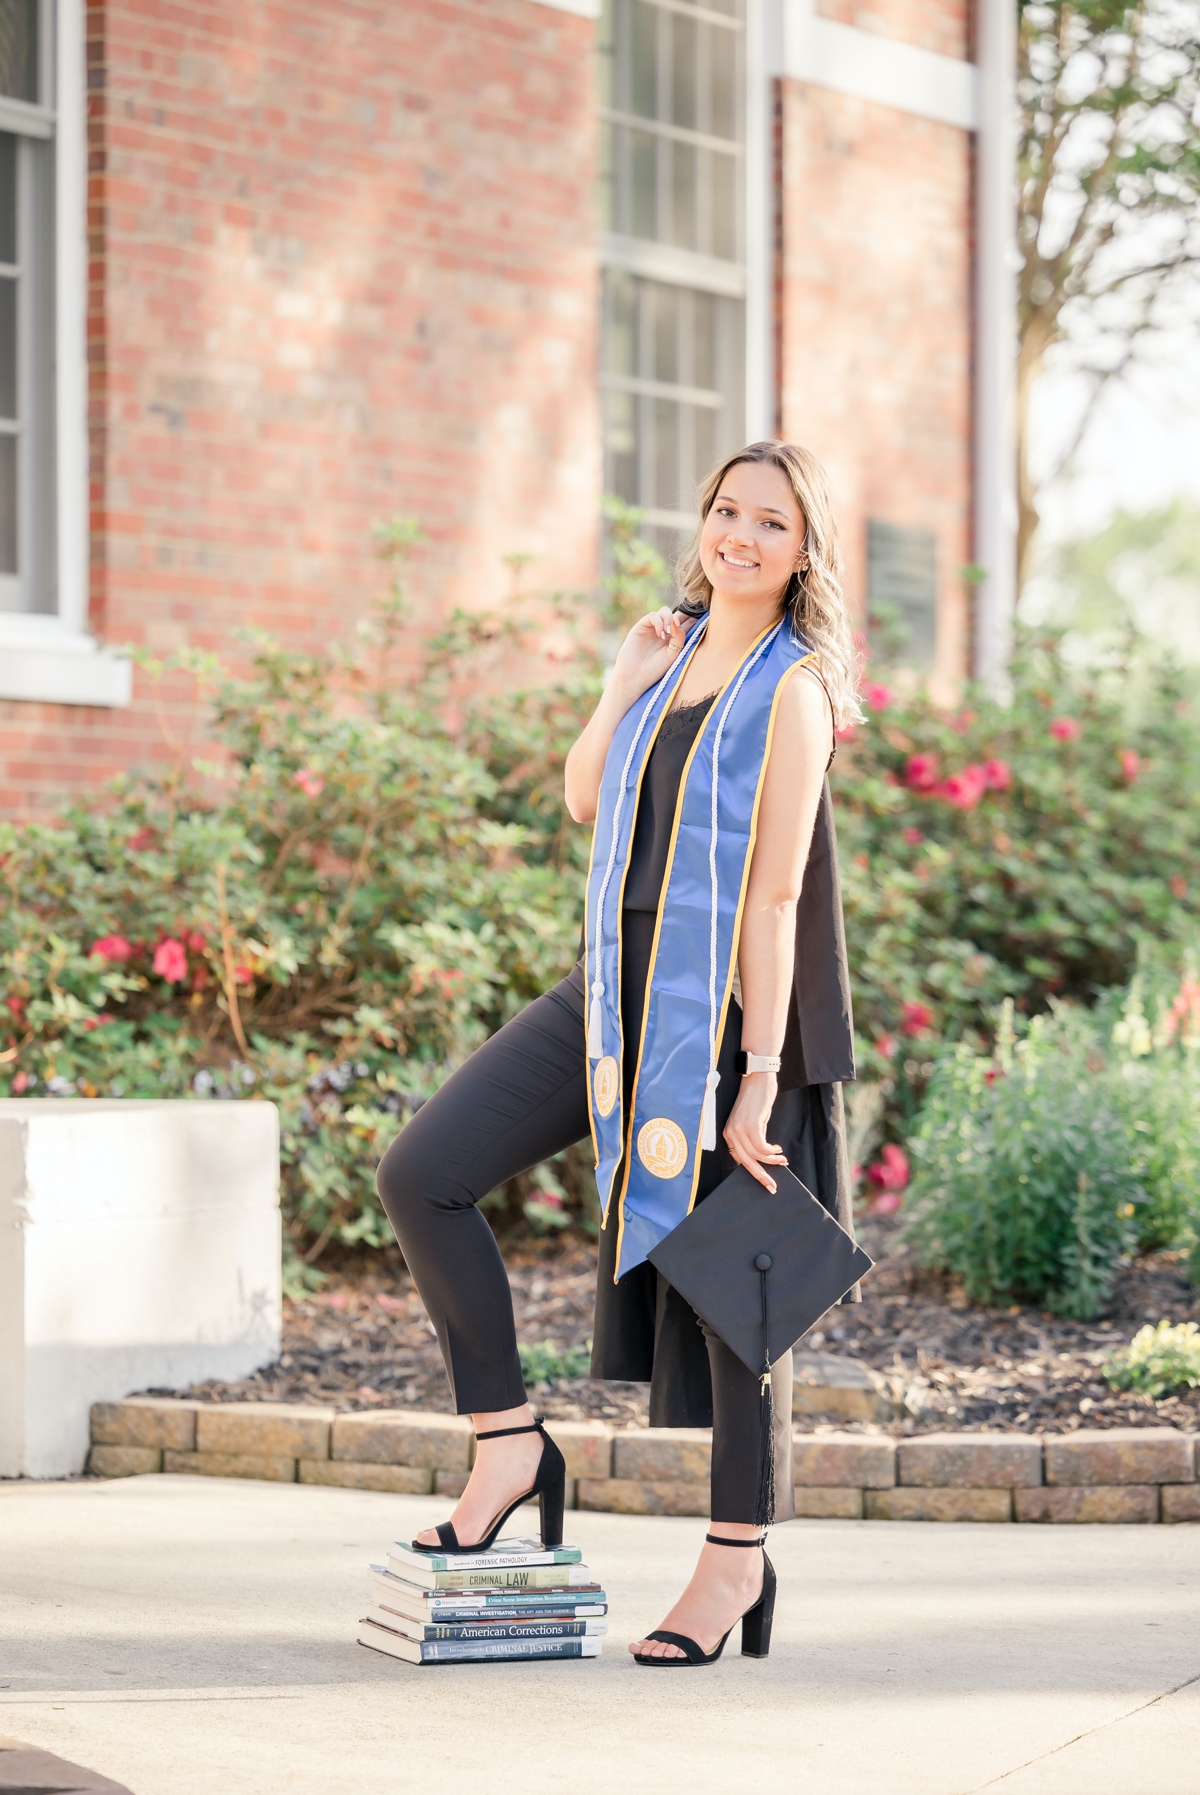 A University of North Georgia graduate standing on the stairs in front of a garden on campus.